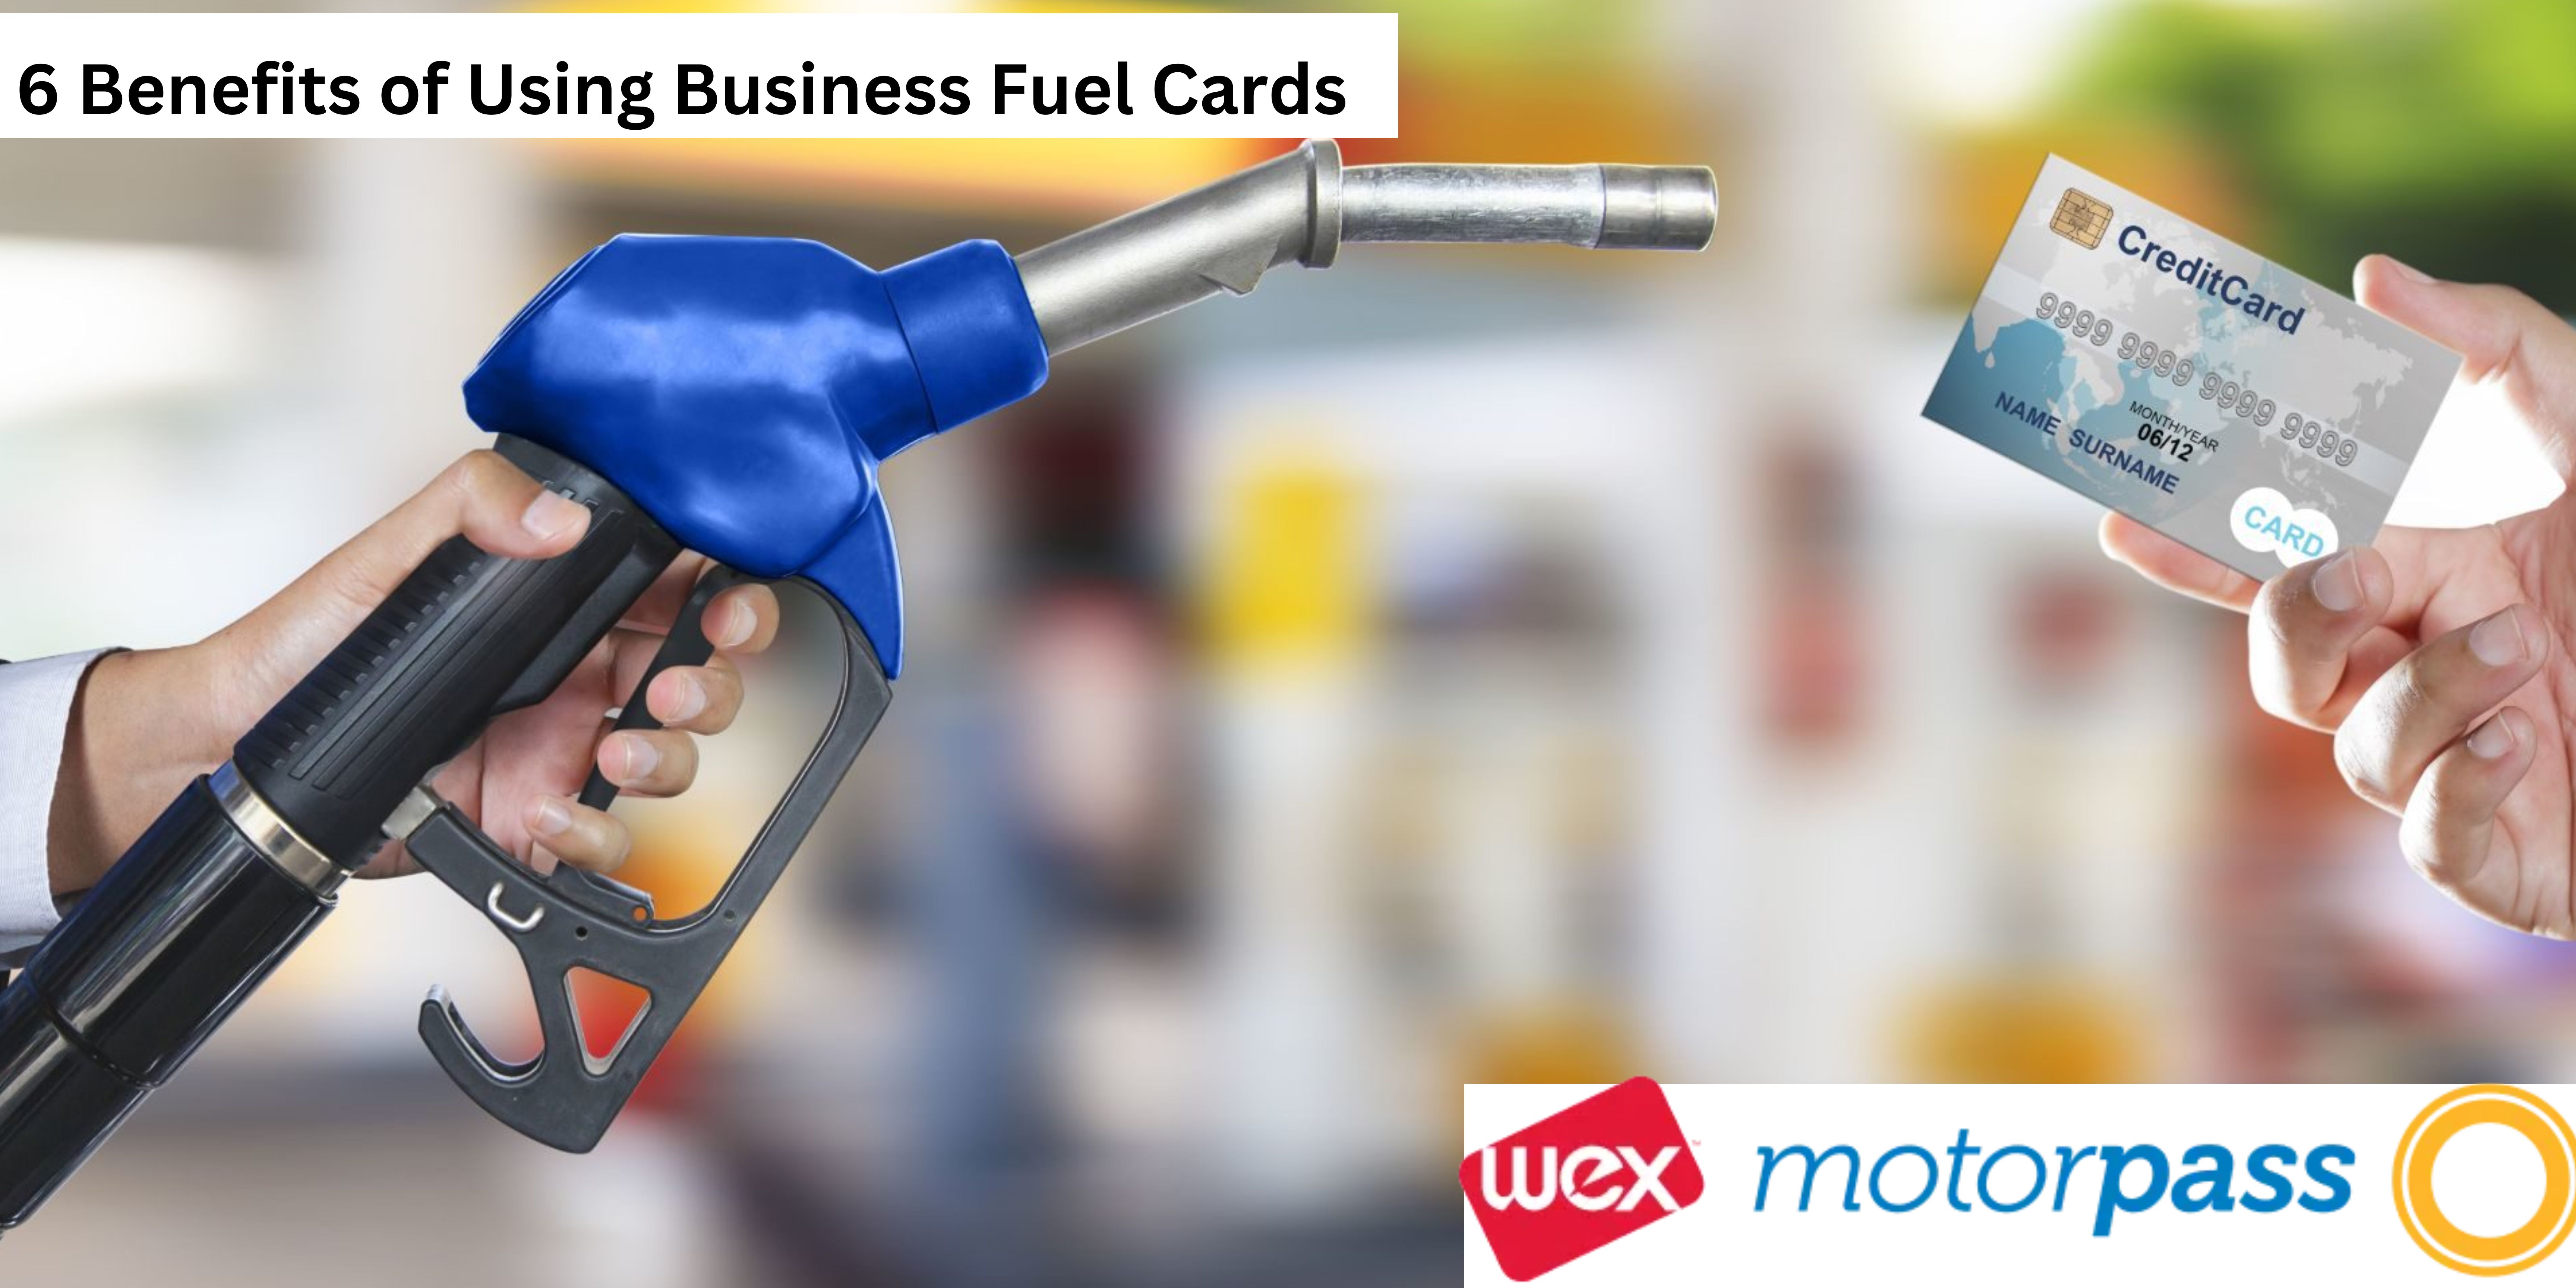 6 Benefits of Using Business Fuel Cards